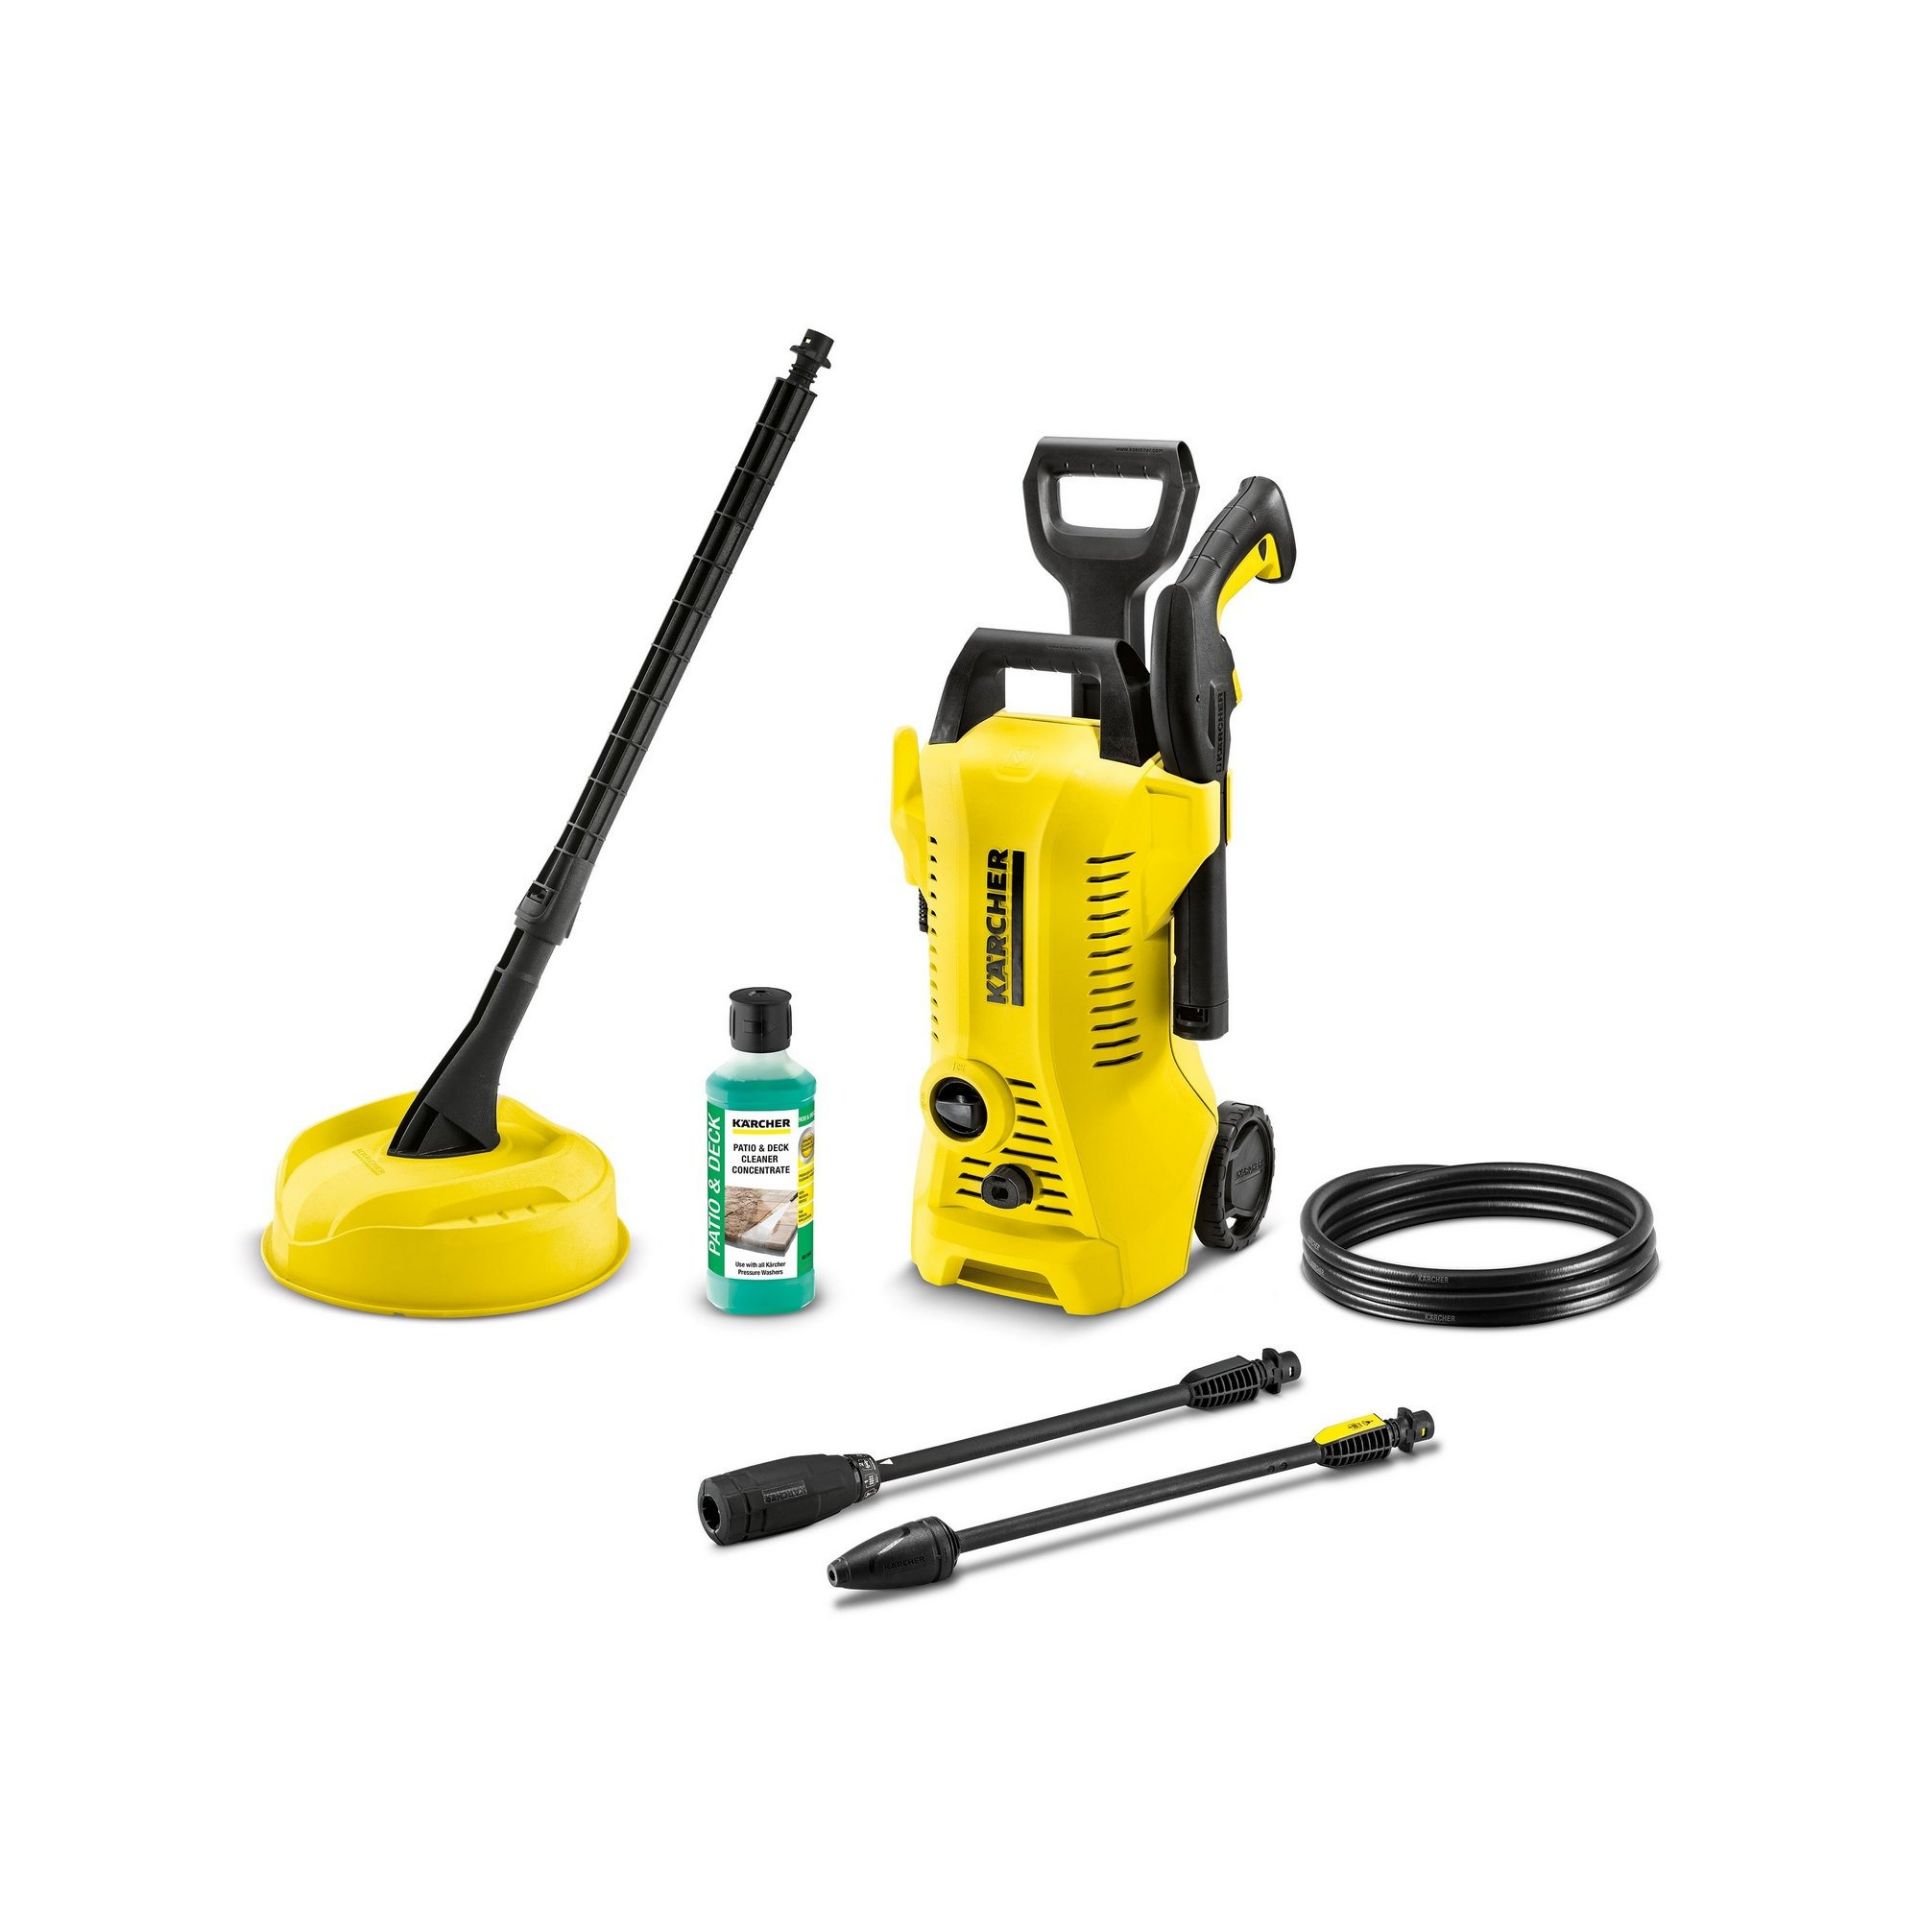 Kärcher K2 Power Control Home Pressure Washer and Patio Cleaner - ER49